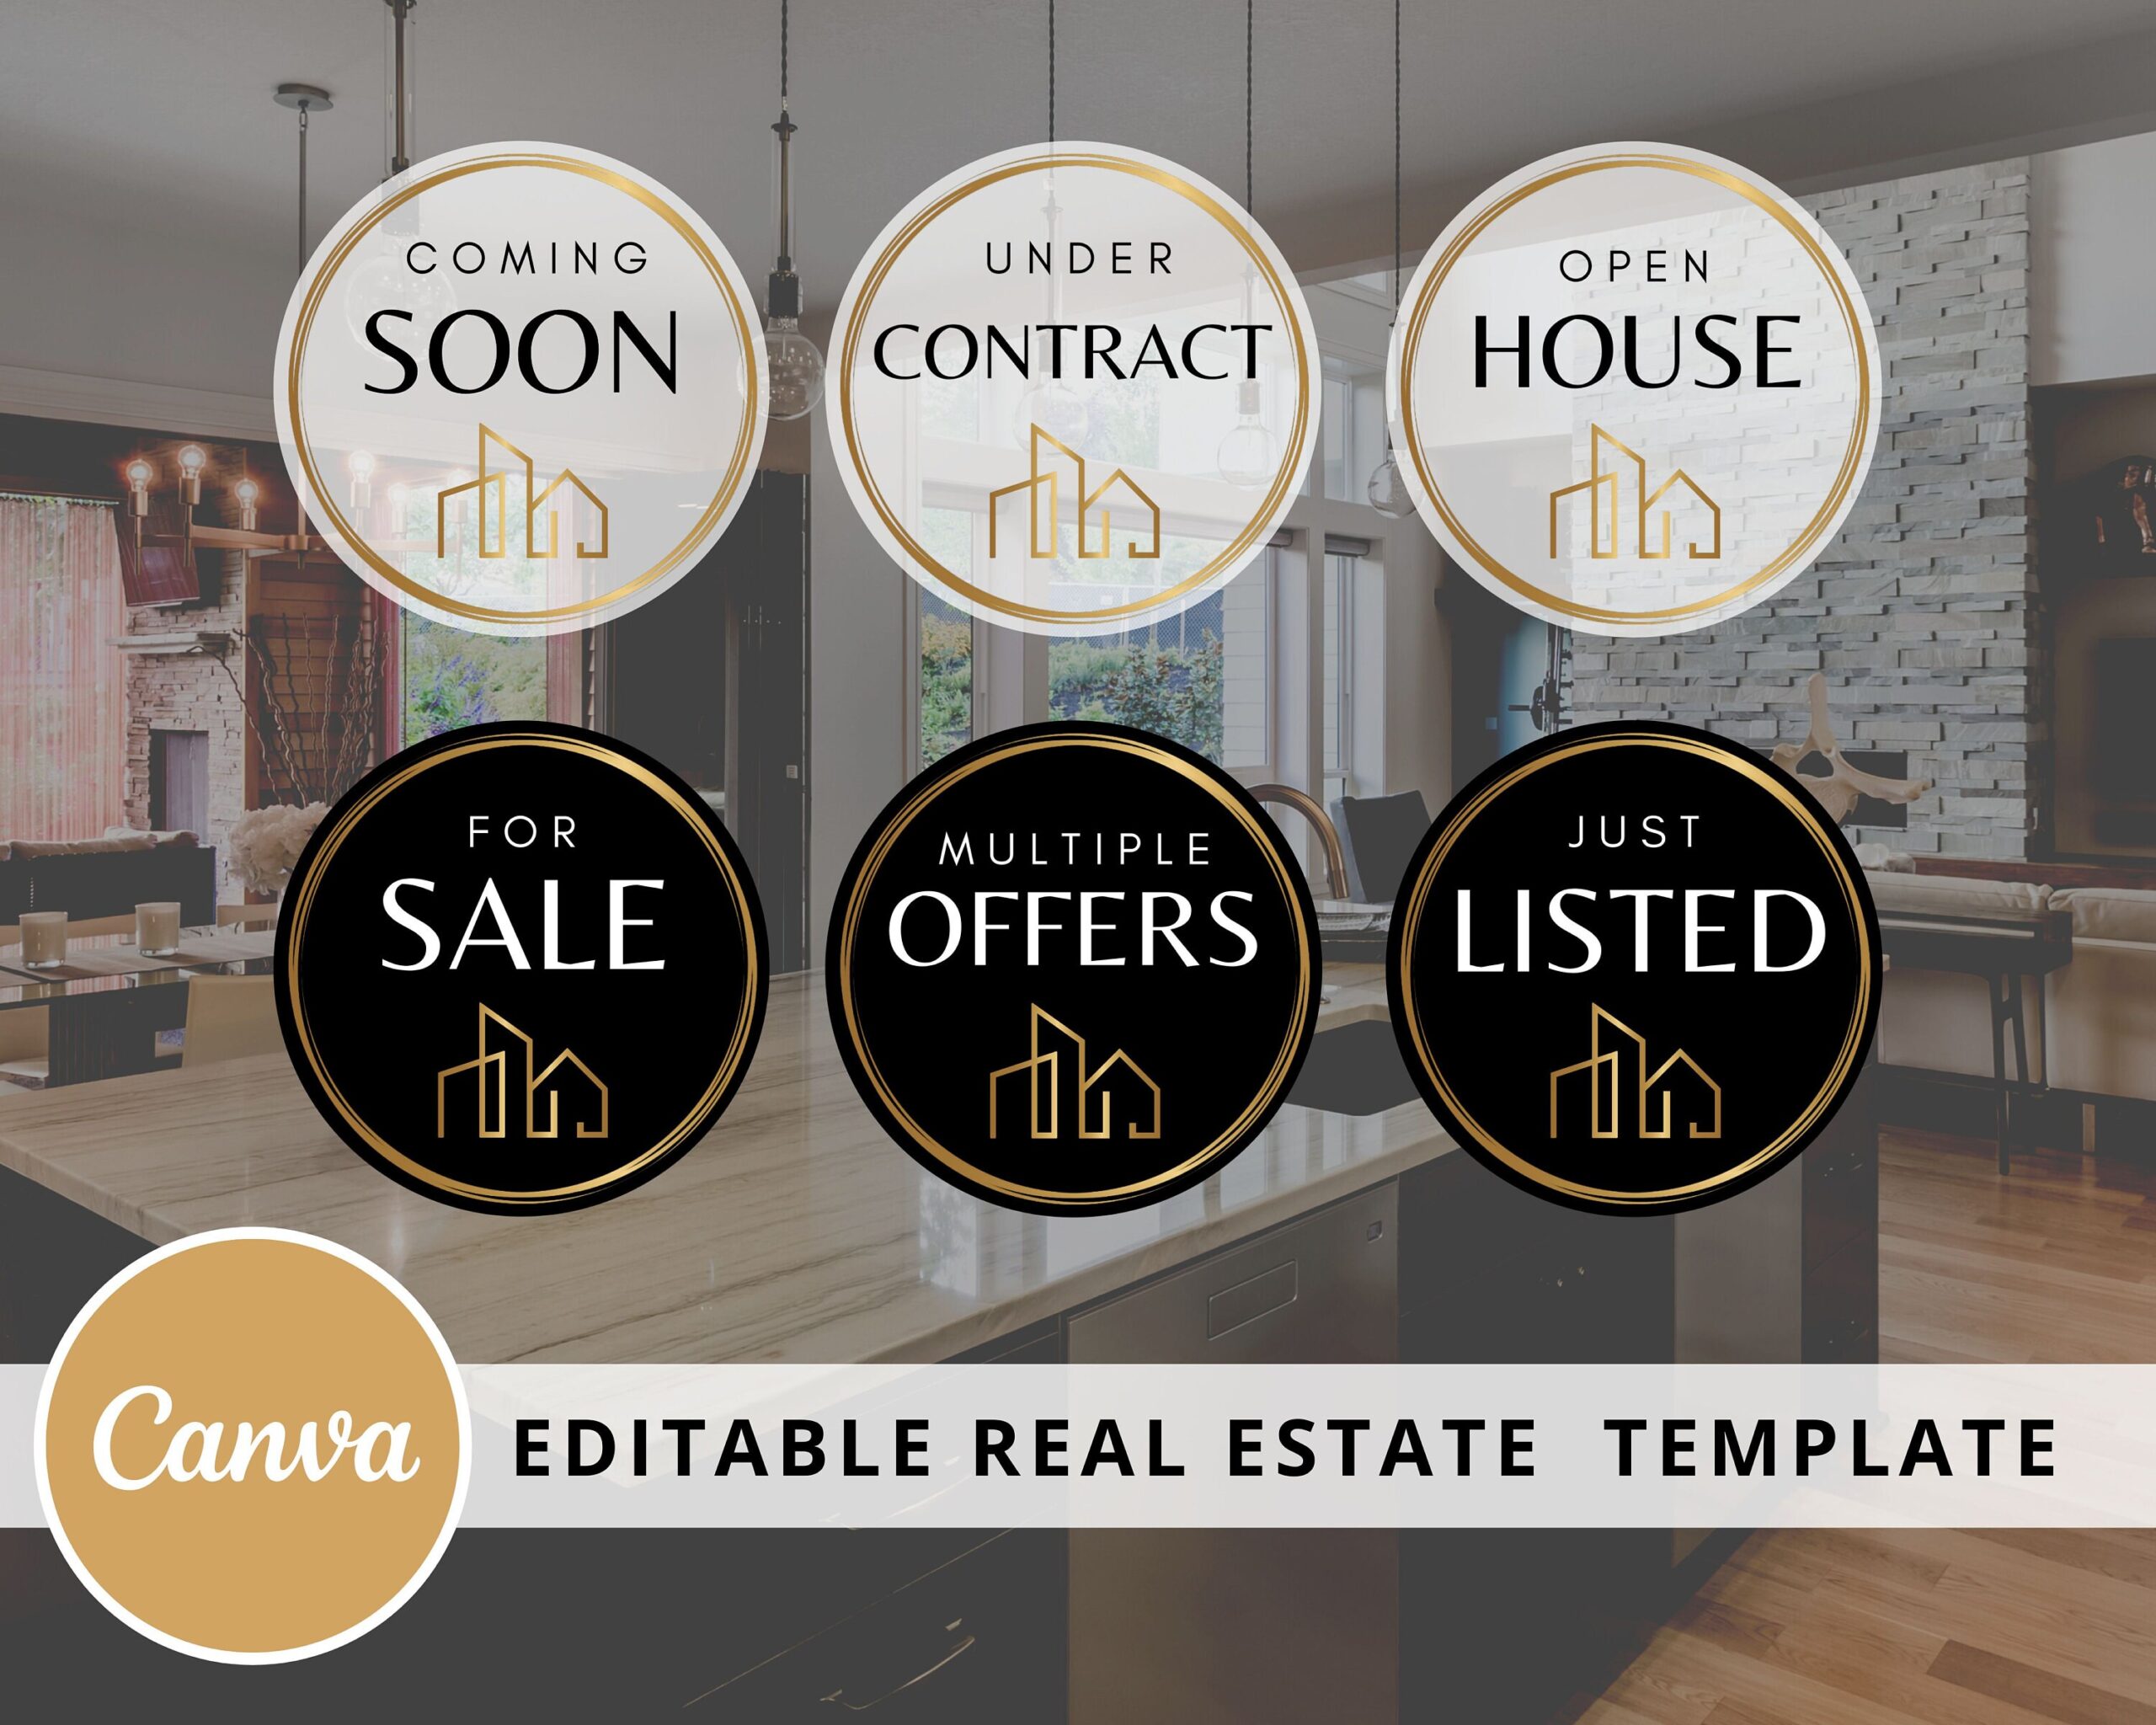 DIY Stamps for Real Estate Agents - 24 Editable Designs in Canva.com - Instagram Highlights - IG Covers - Sold, Just Listed, Coming Soon...